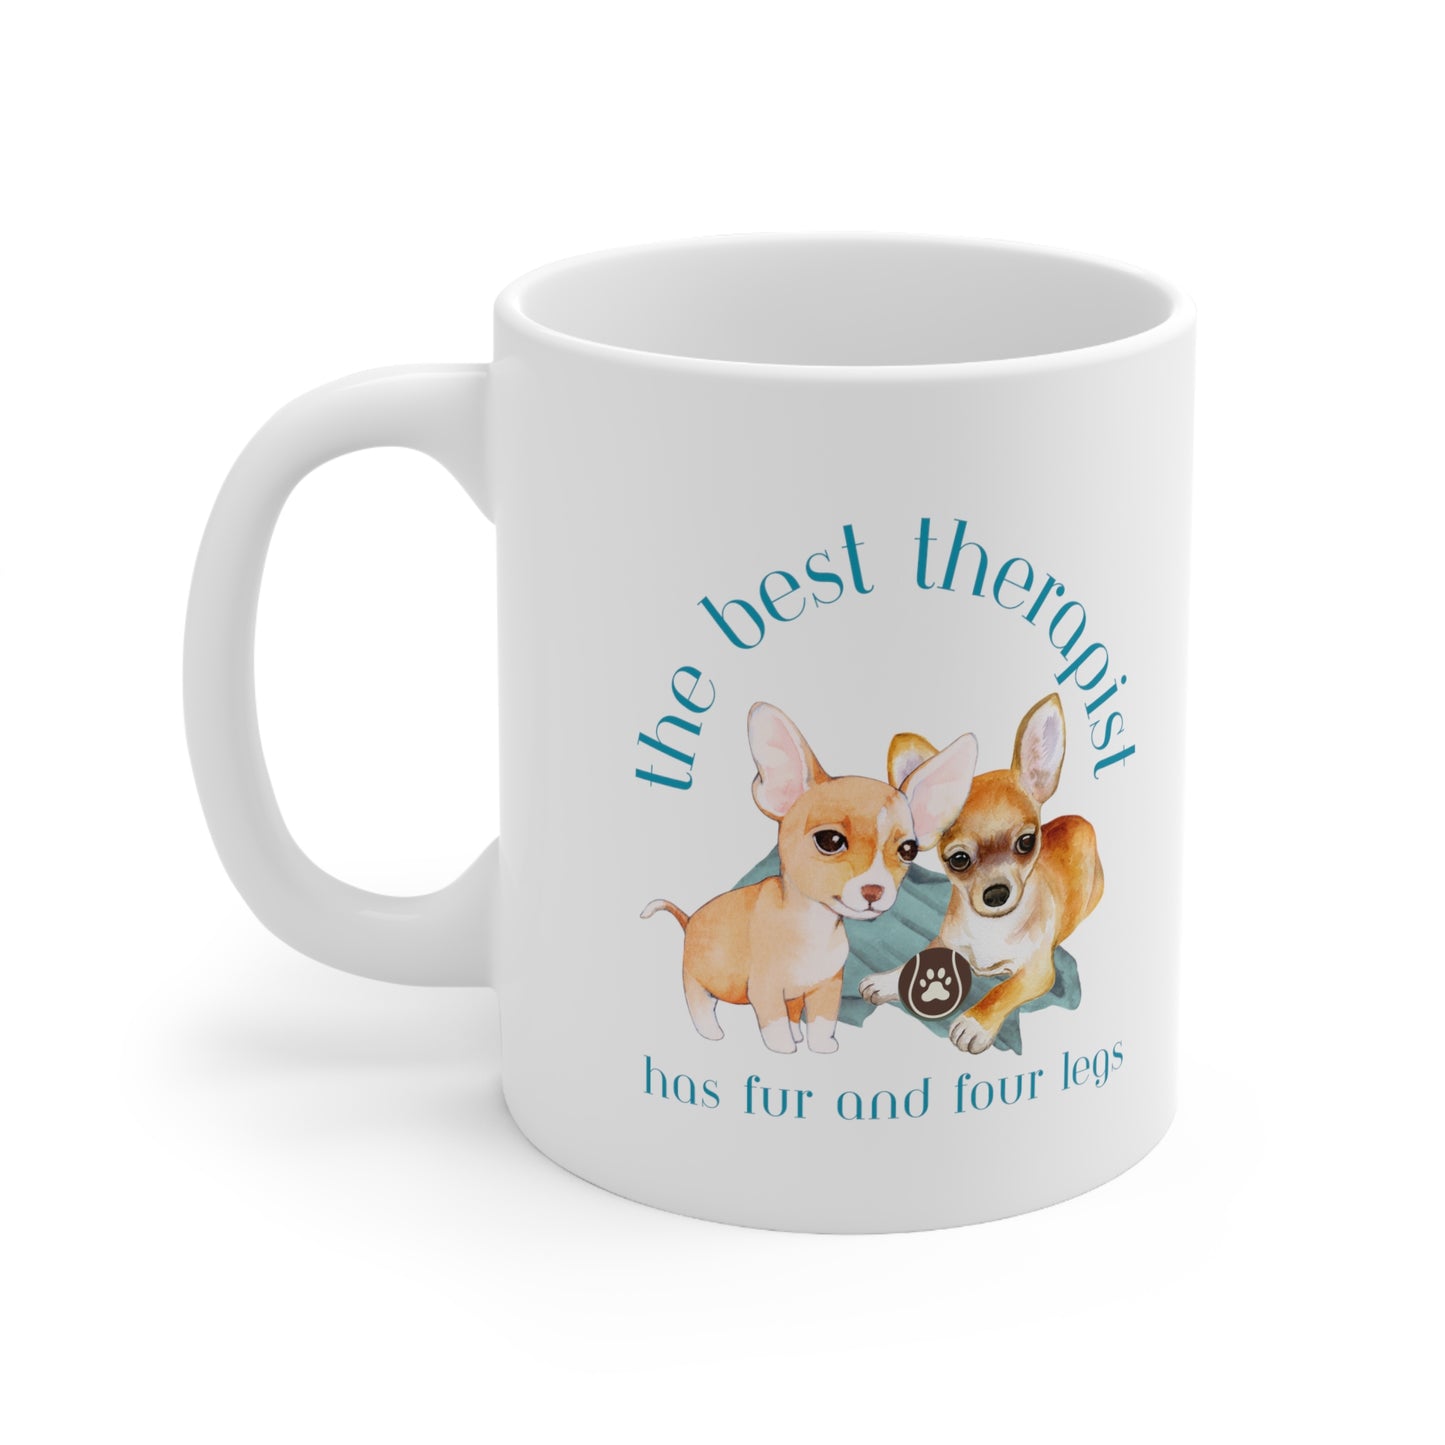 The Best Therapist Has Fur and Four Legs, Chihuahua Ceramic Mug 11oz